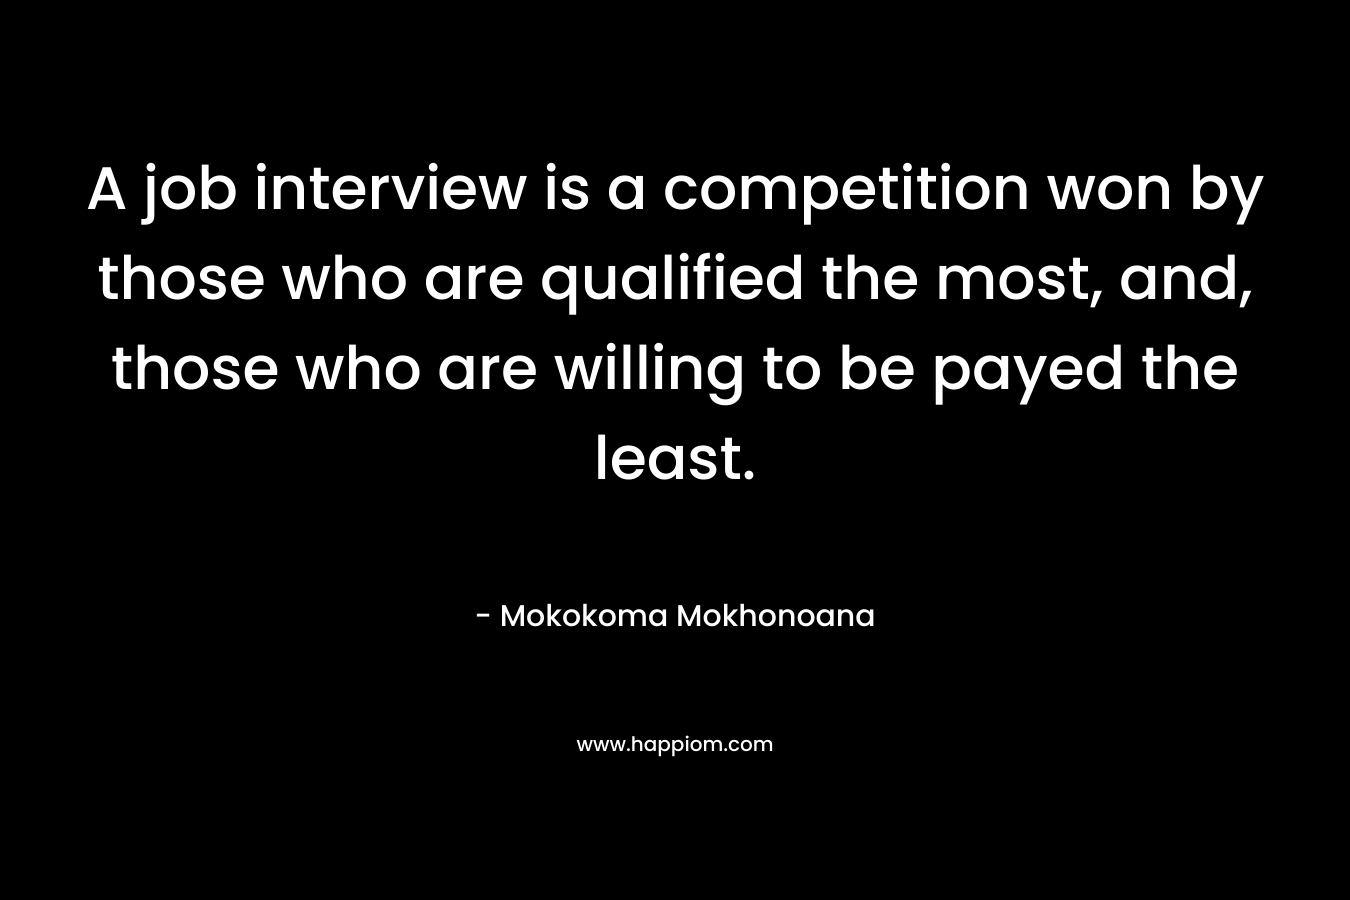 A job interview is a competition won by those who are qualified the most, and, those who are willing to be payed the least. – Mokokoma Mokhonoana